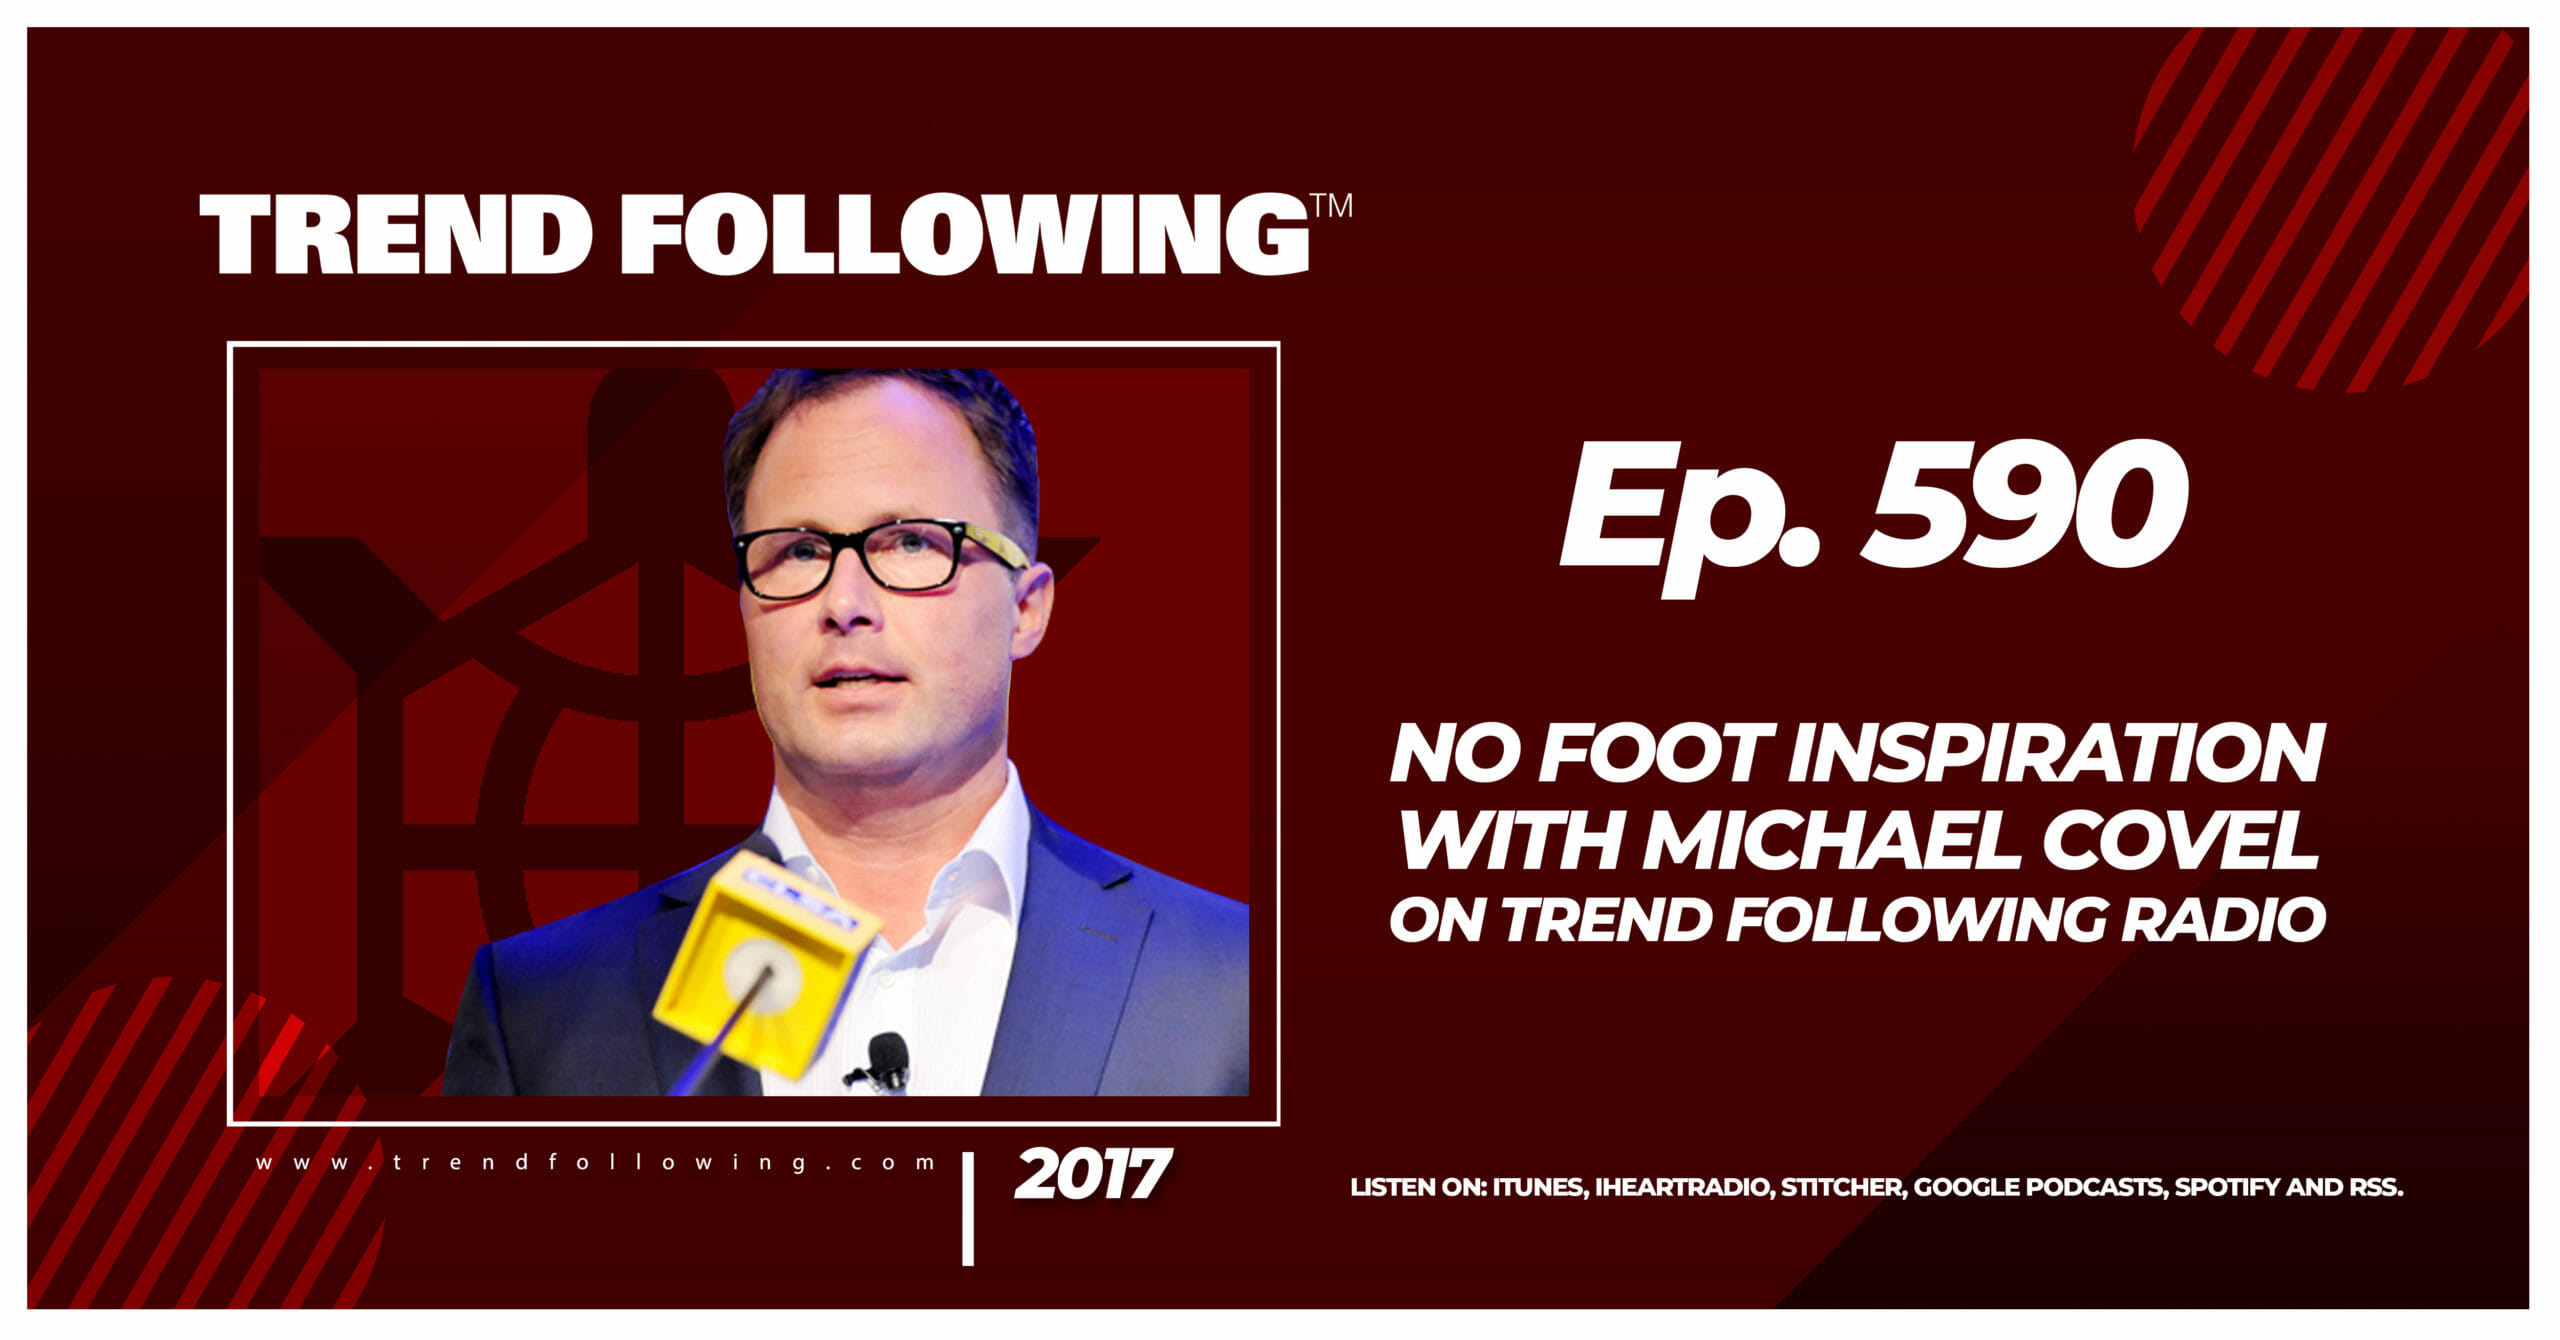 No Foot Inspiration with Michael Covel on Trend Following Radio